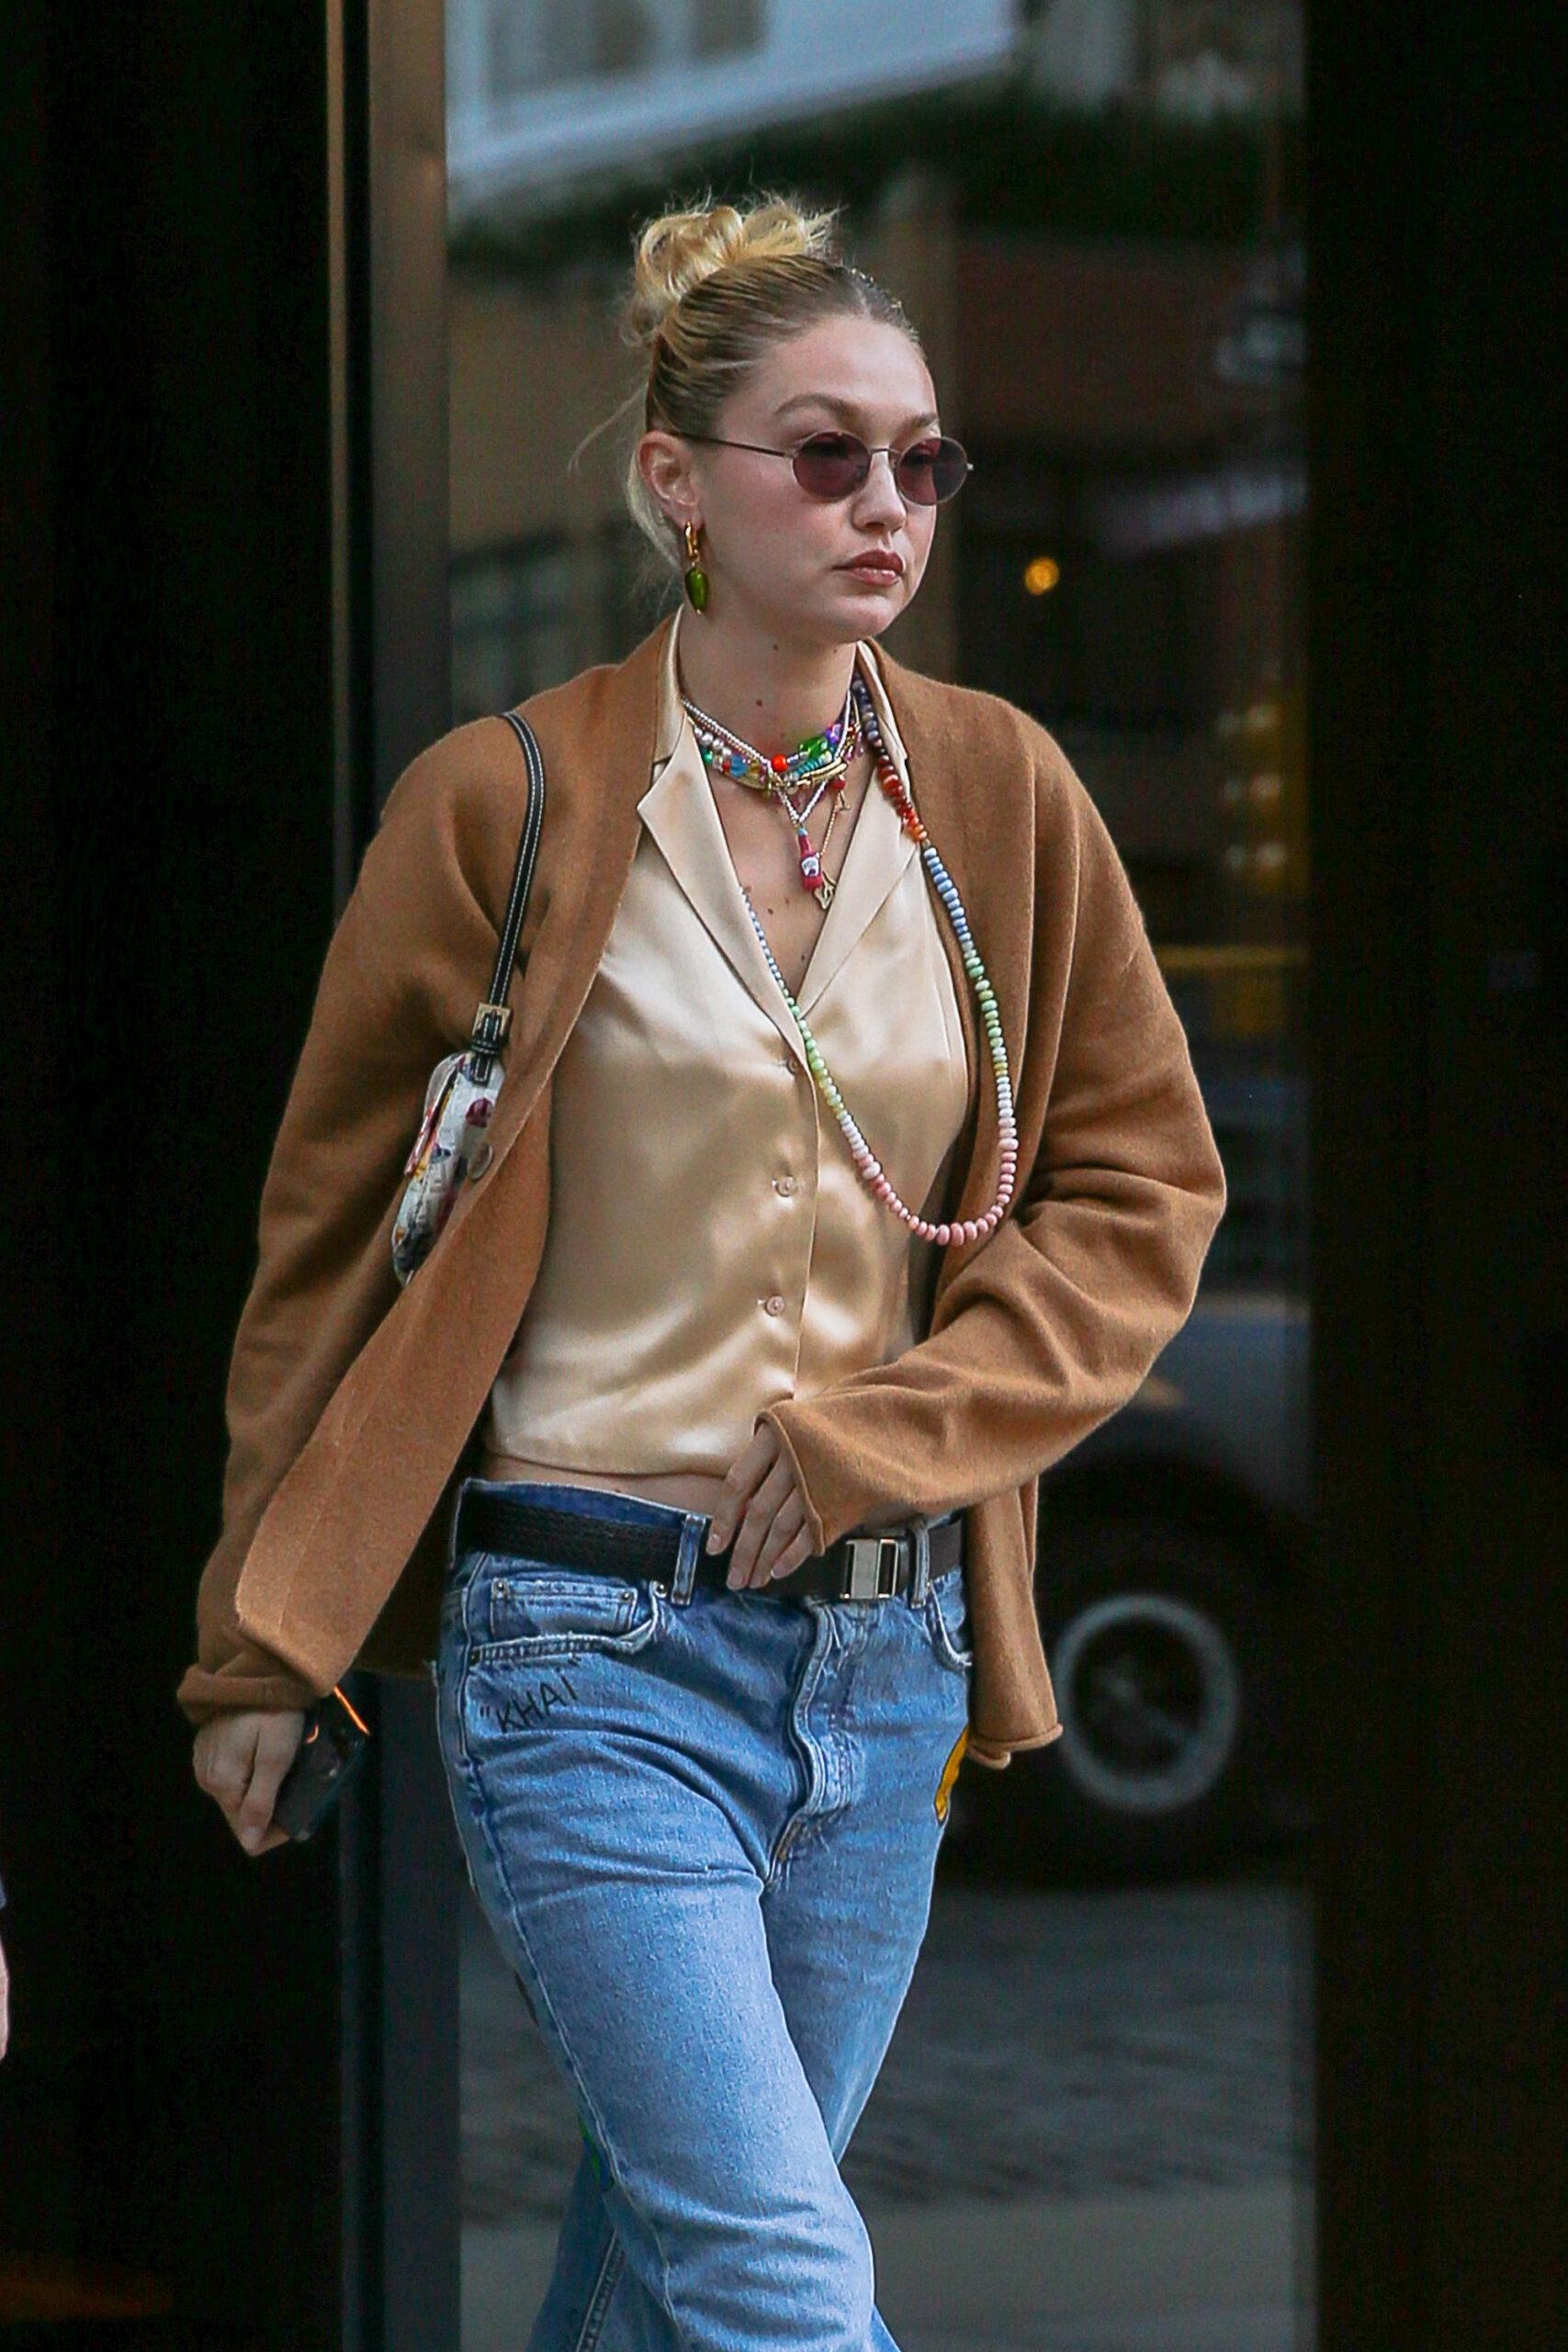 Gigi Hadid was spotted heading out in New York City